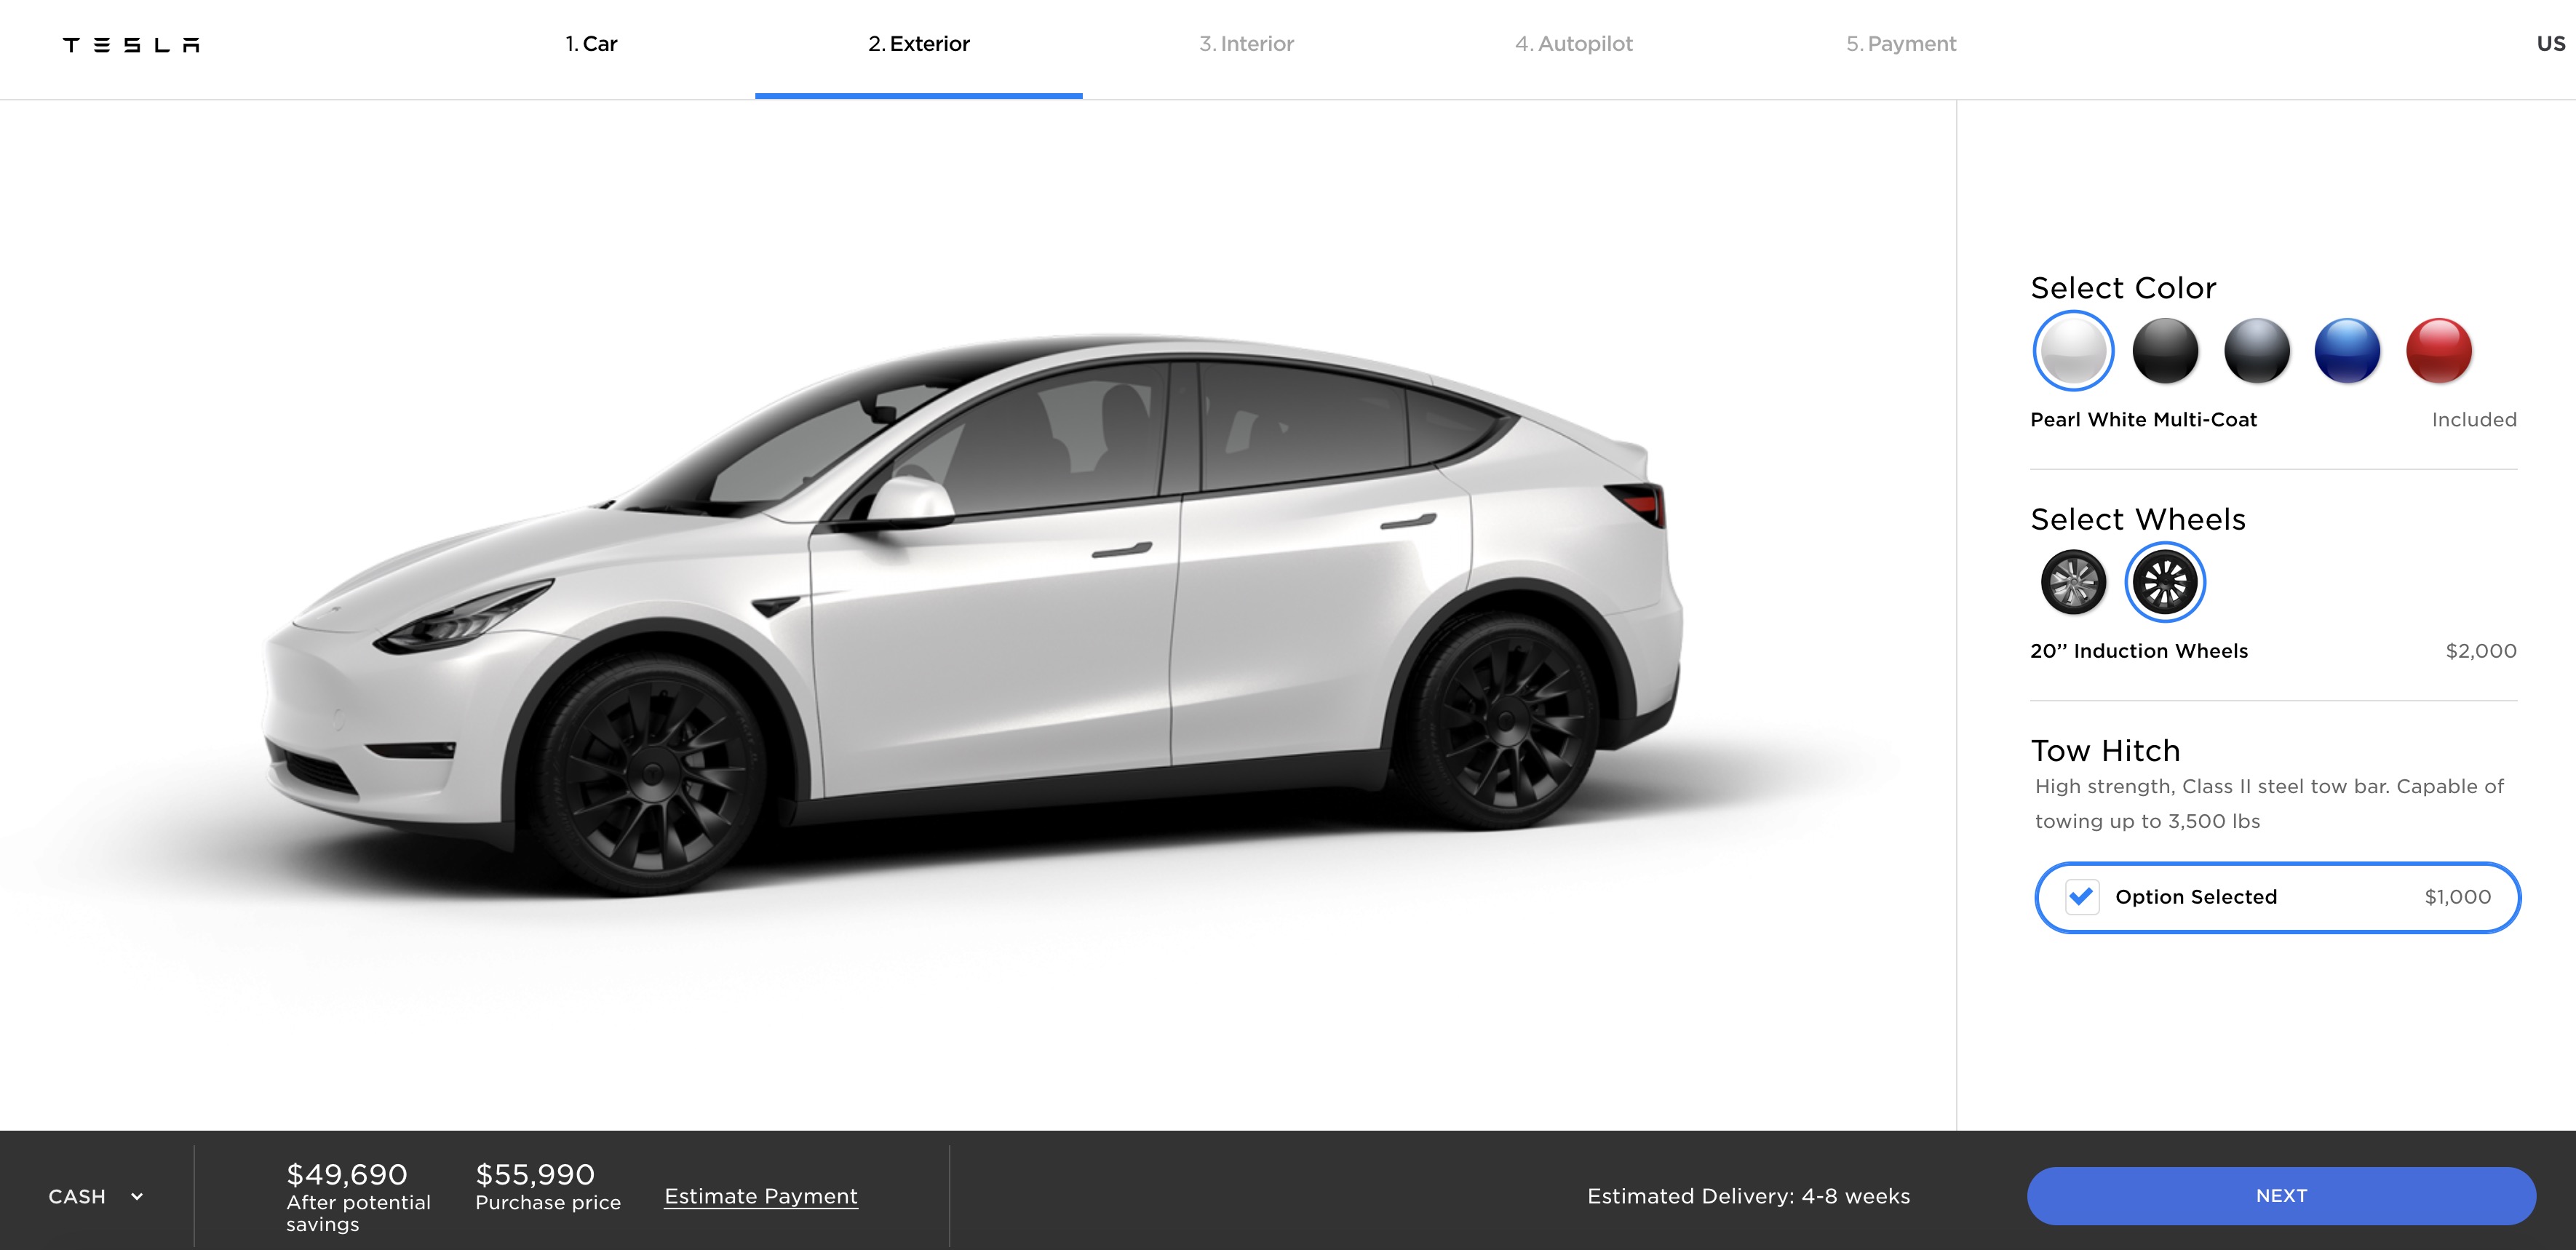 Tesla launches Model Y tow package, reveals strange detail about towing